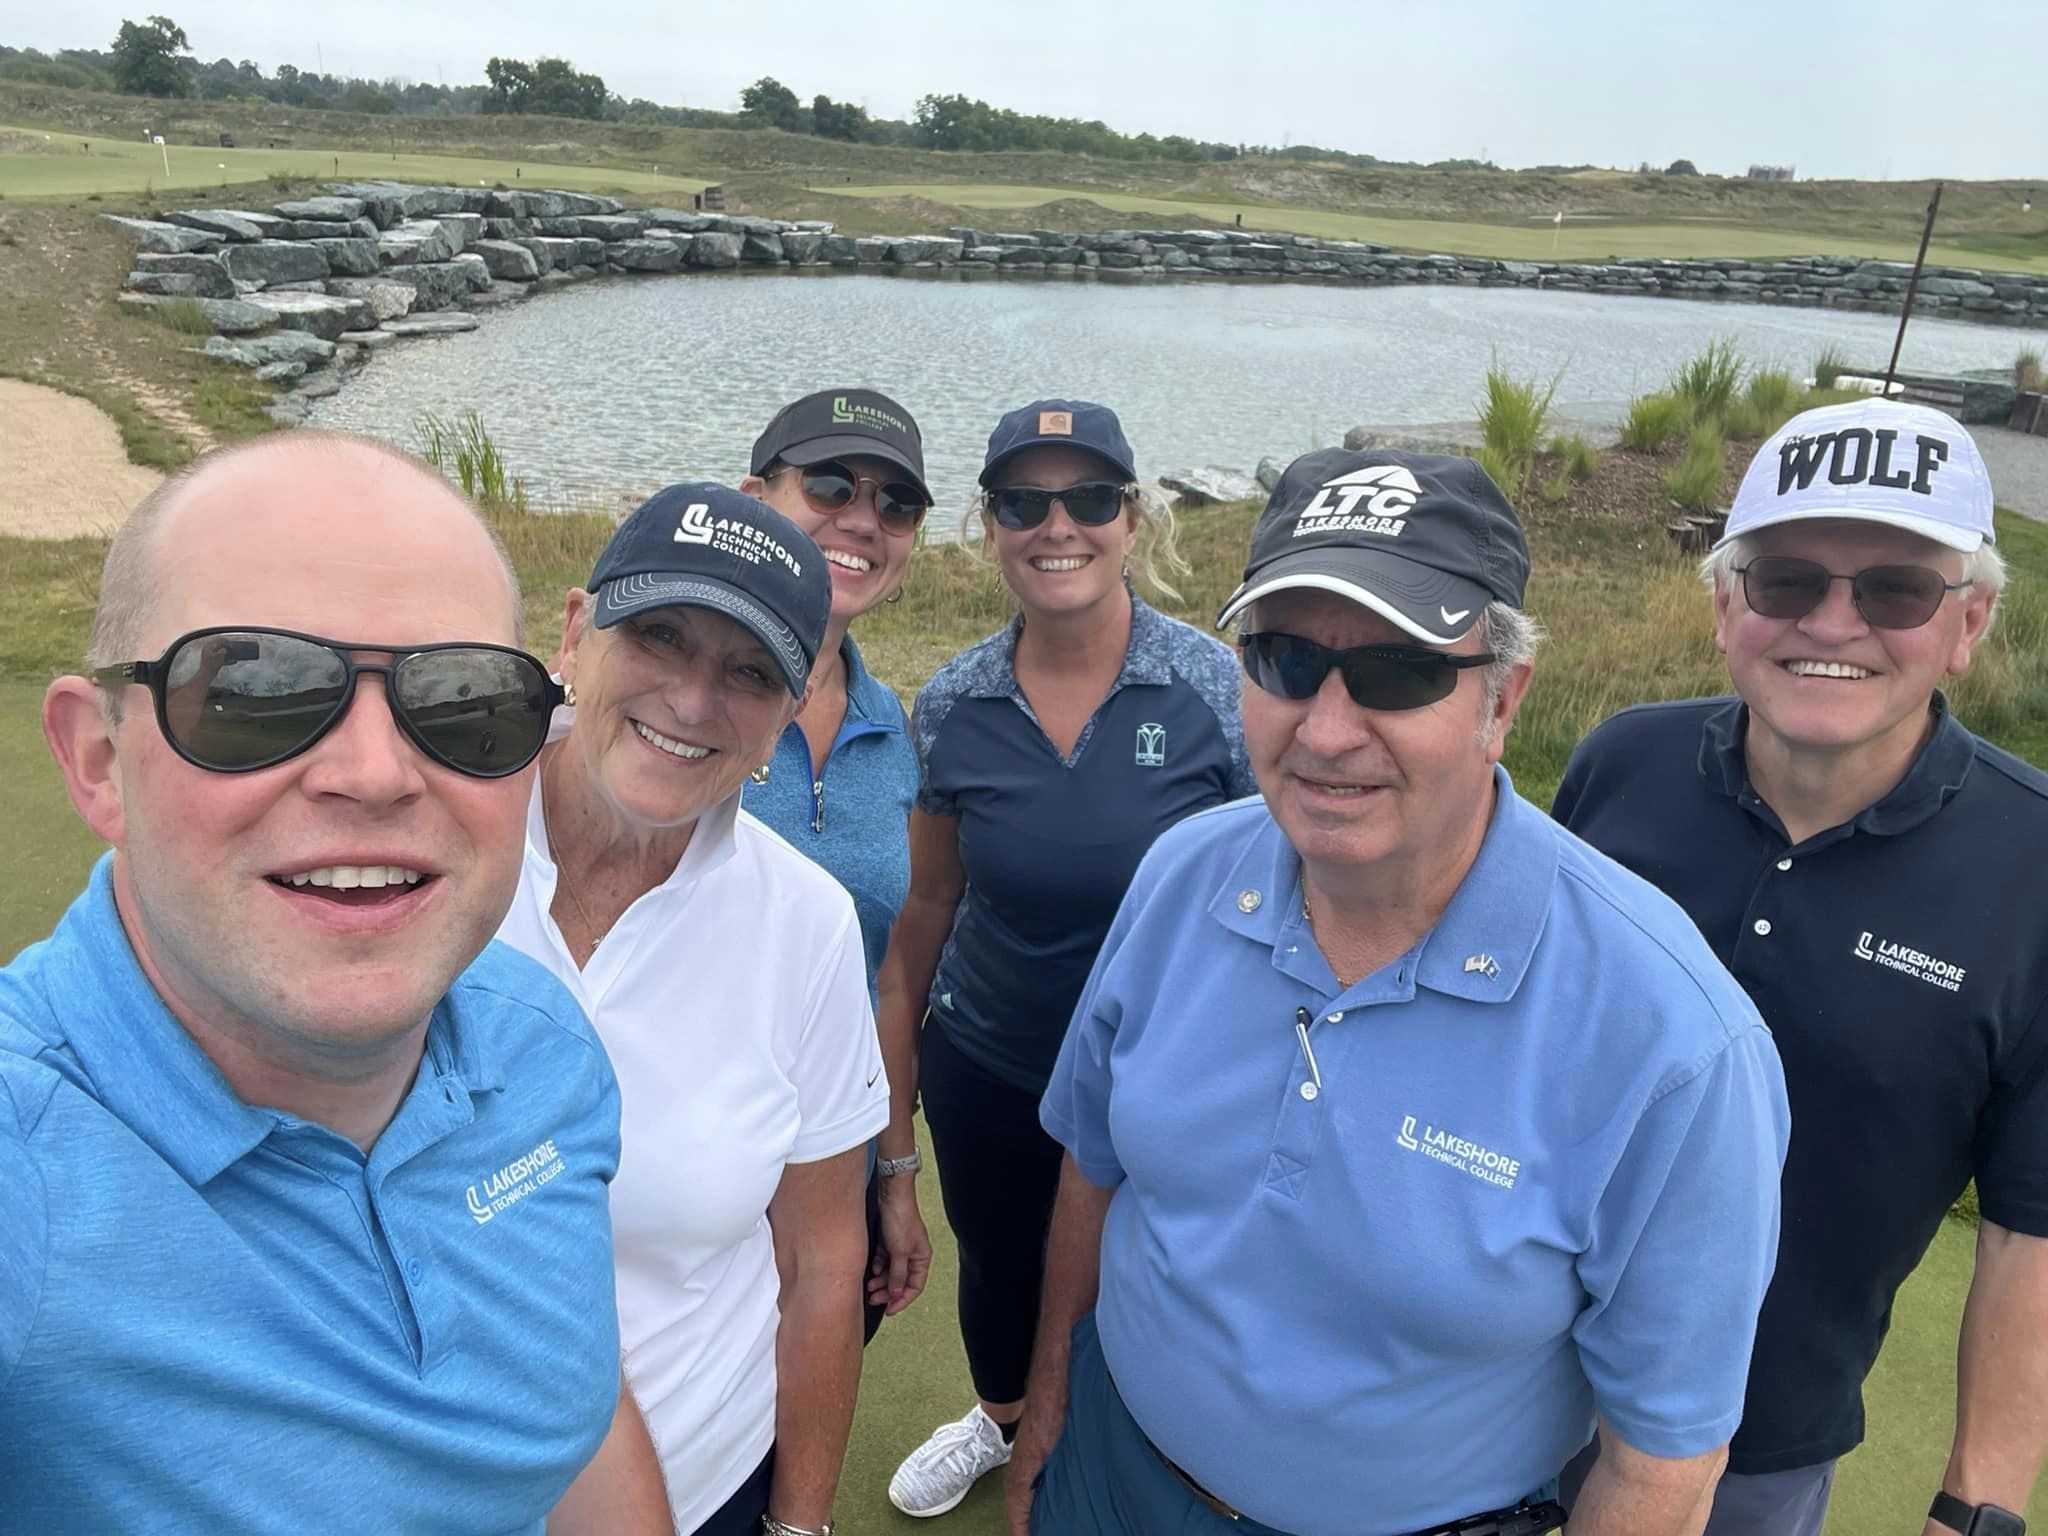 Participants of LTC Foundation Golf Event standing on a golf green by a lake